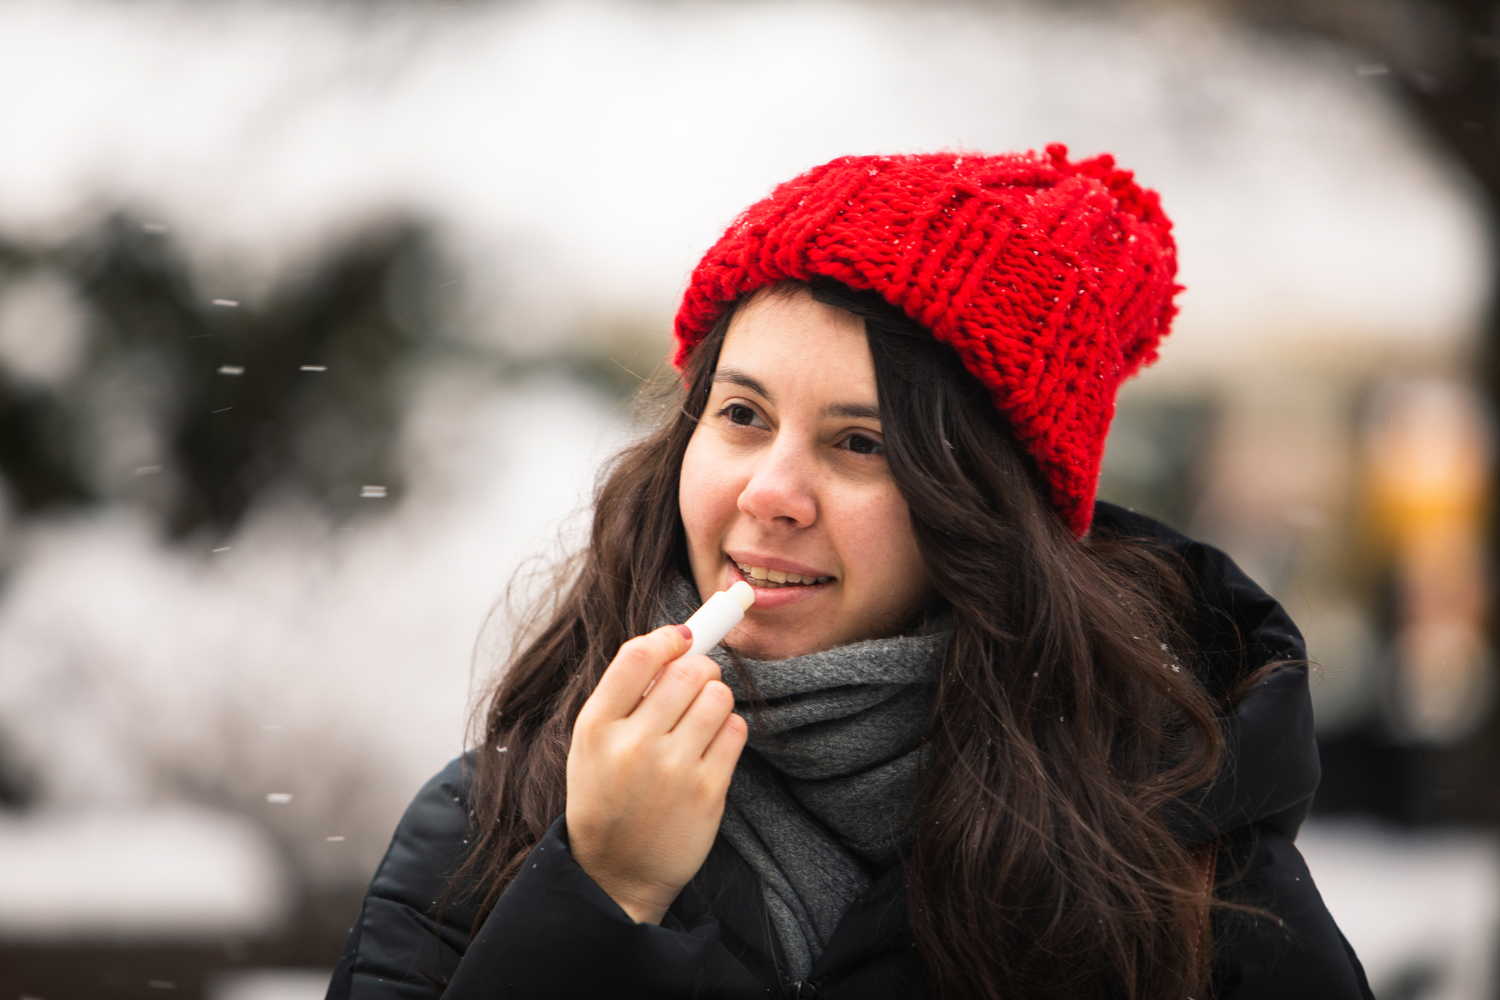 Winter-proof your lips with this DIY lip balm